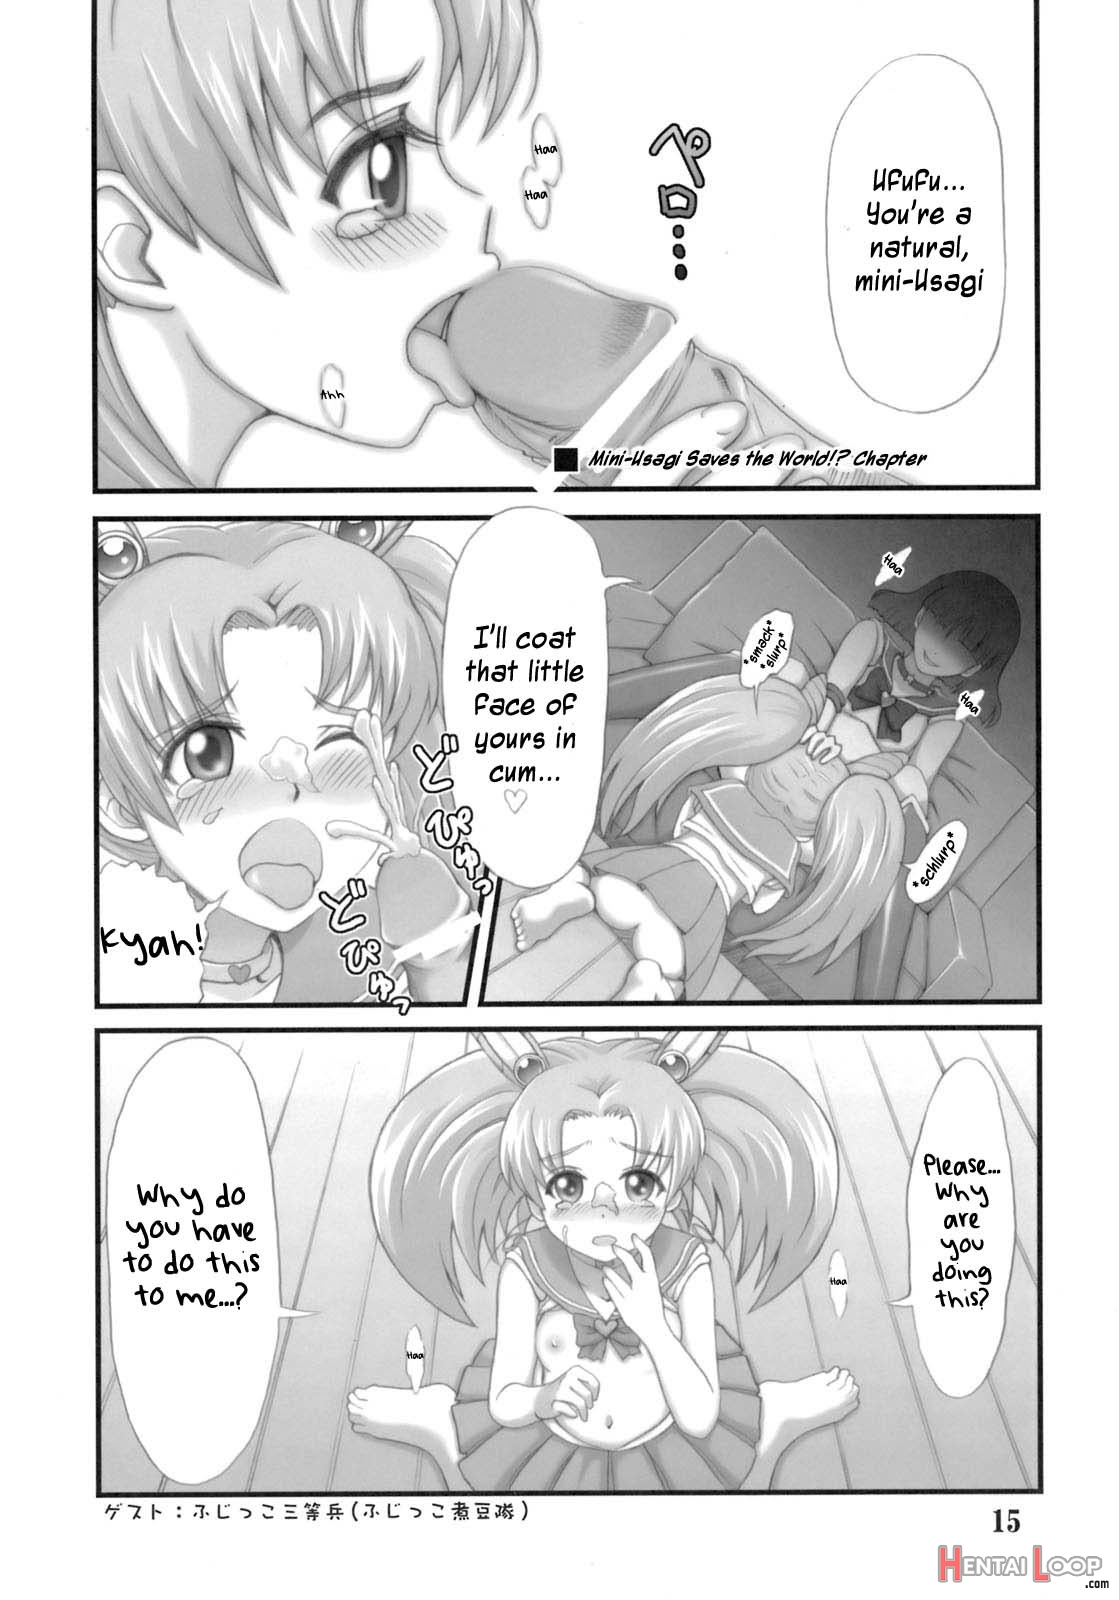 Milky Moon 2 - Completed Edition page 14